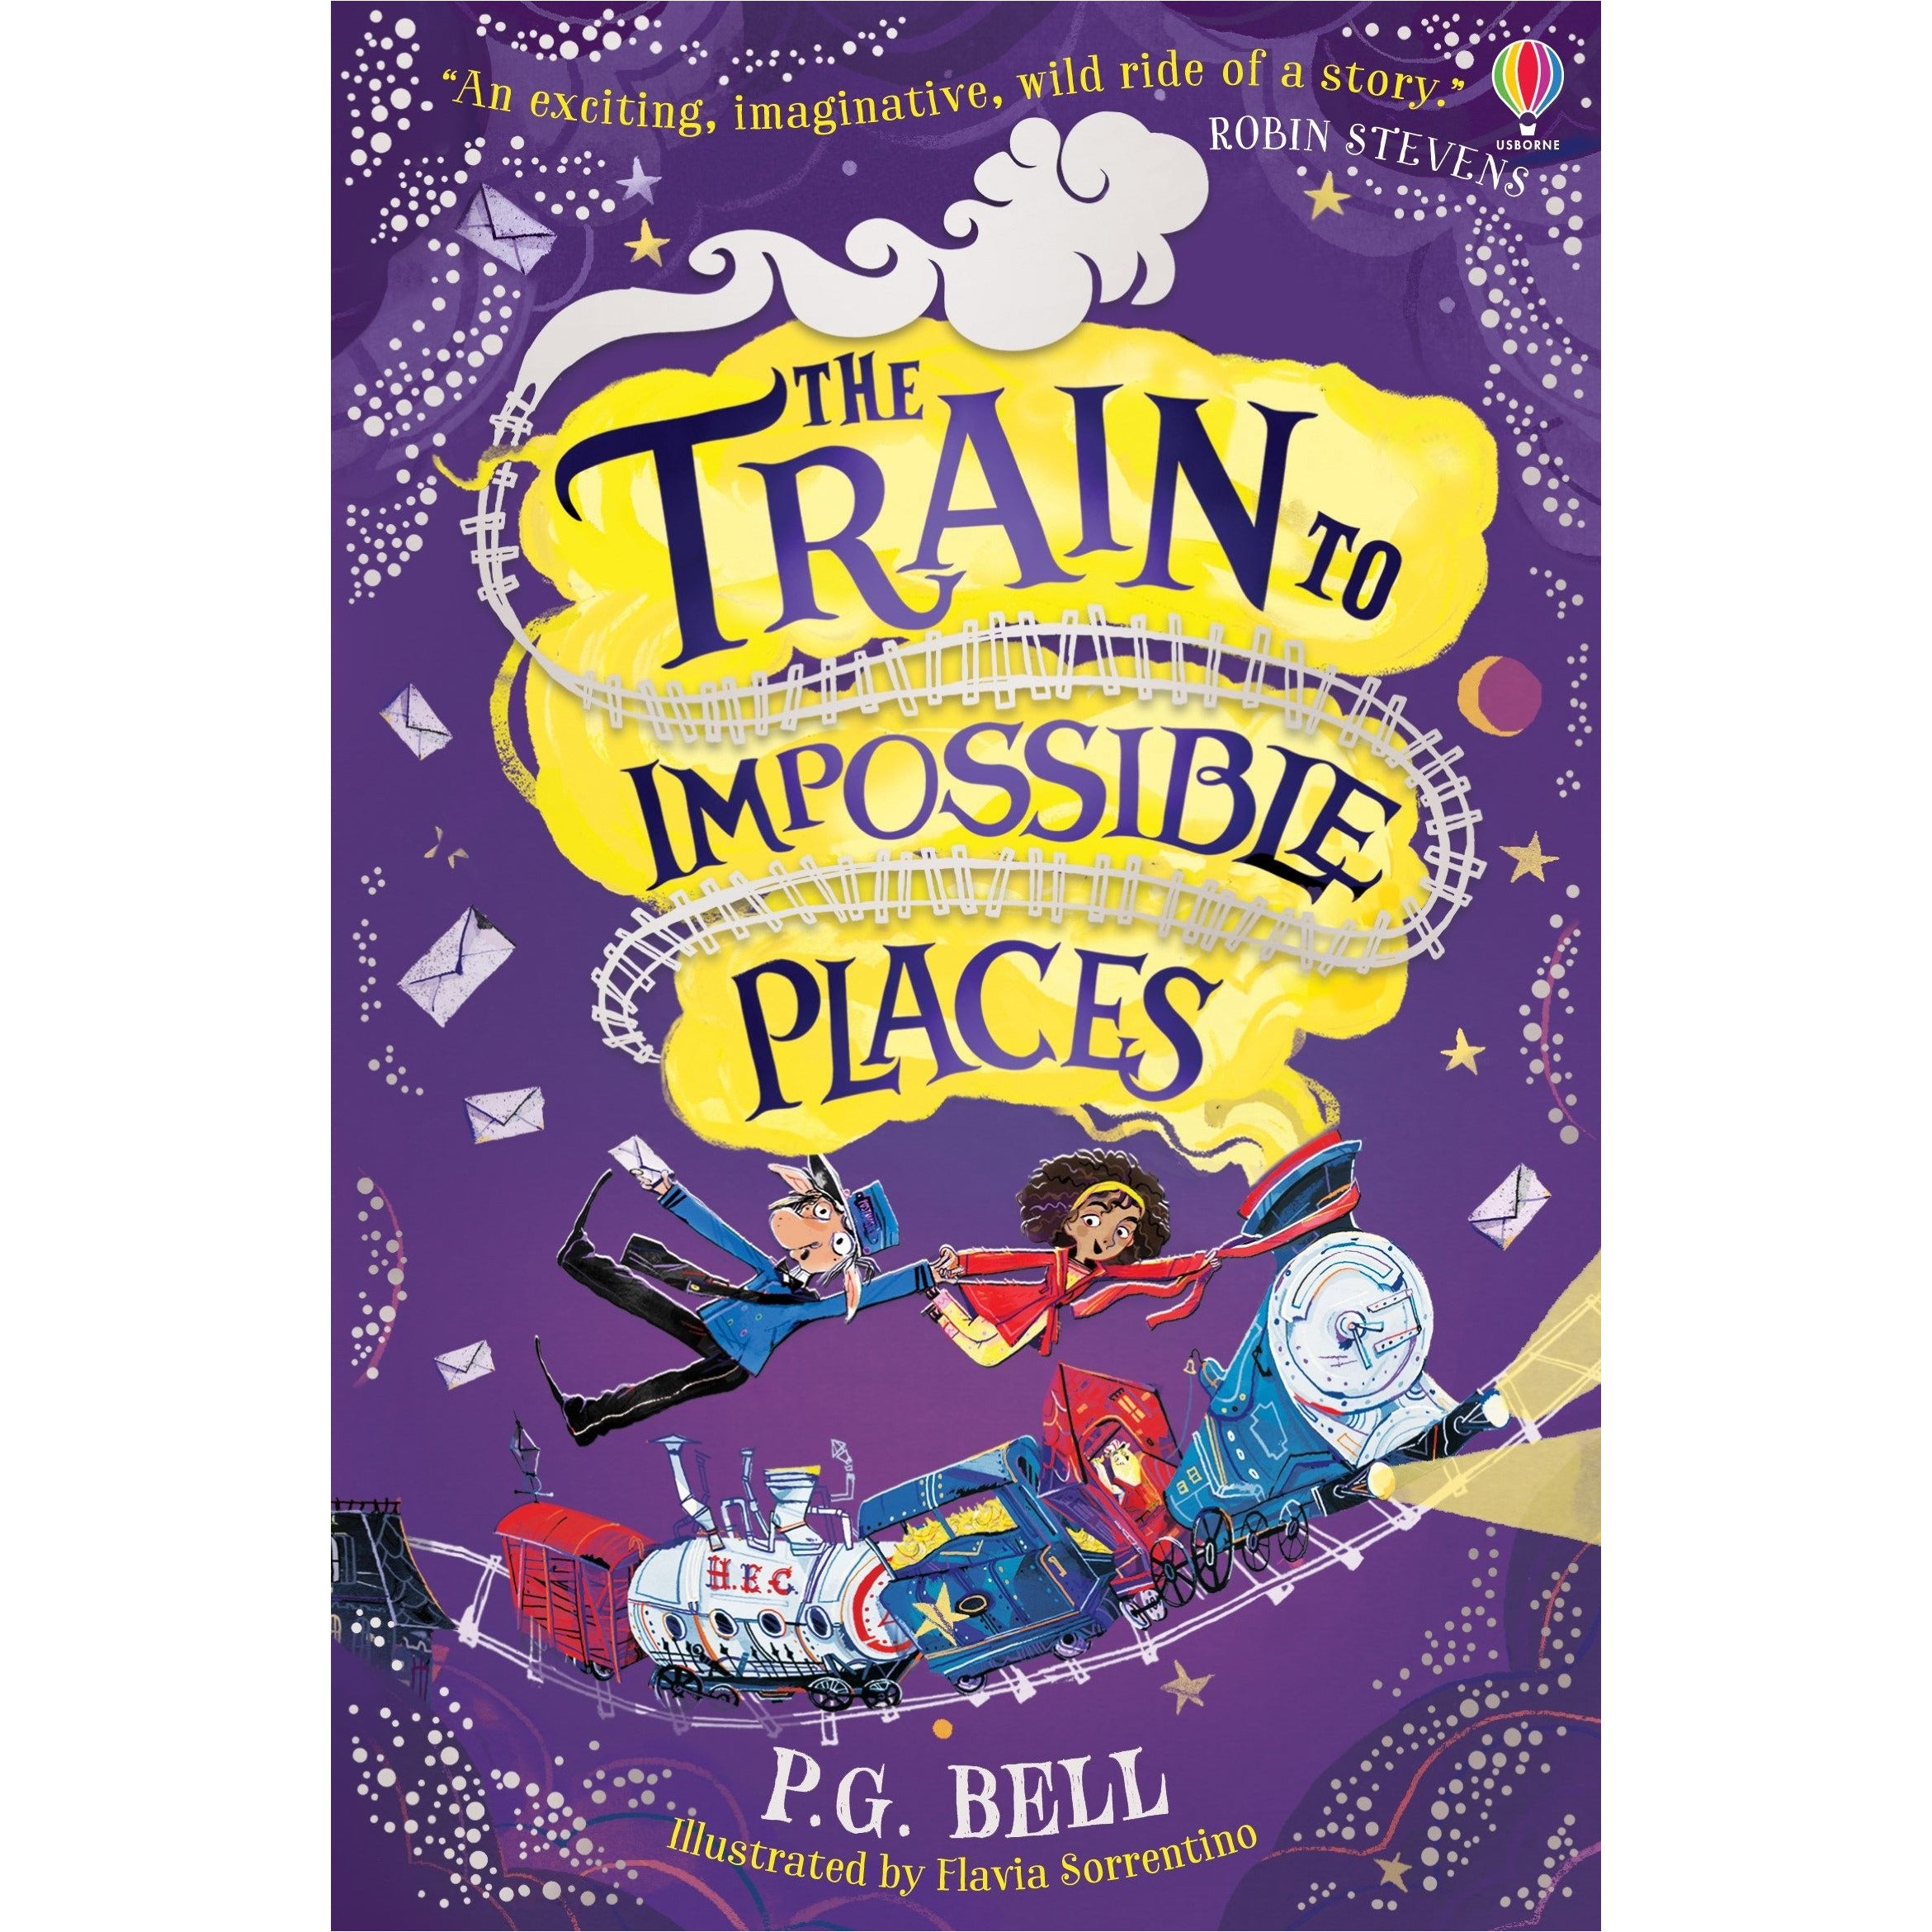 Train to Impossible Places - P.G. Bell